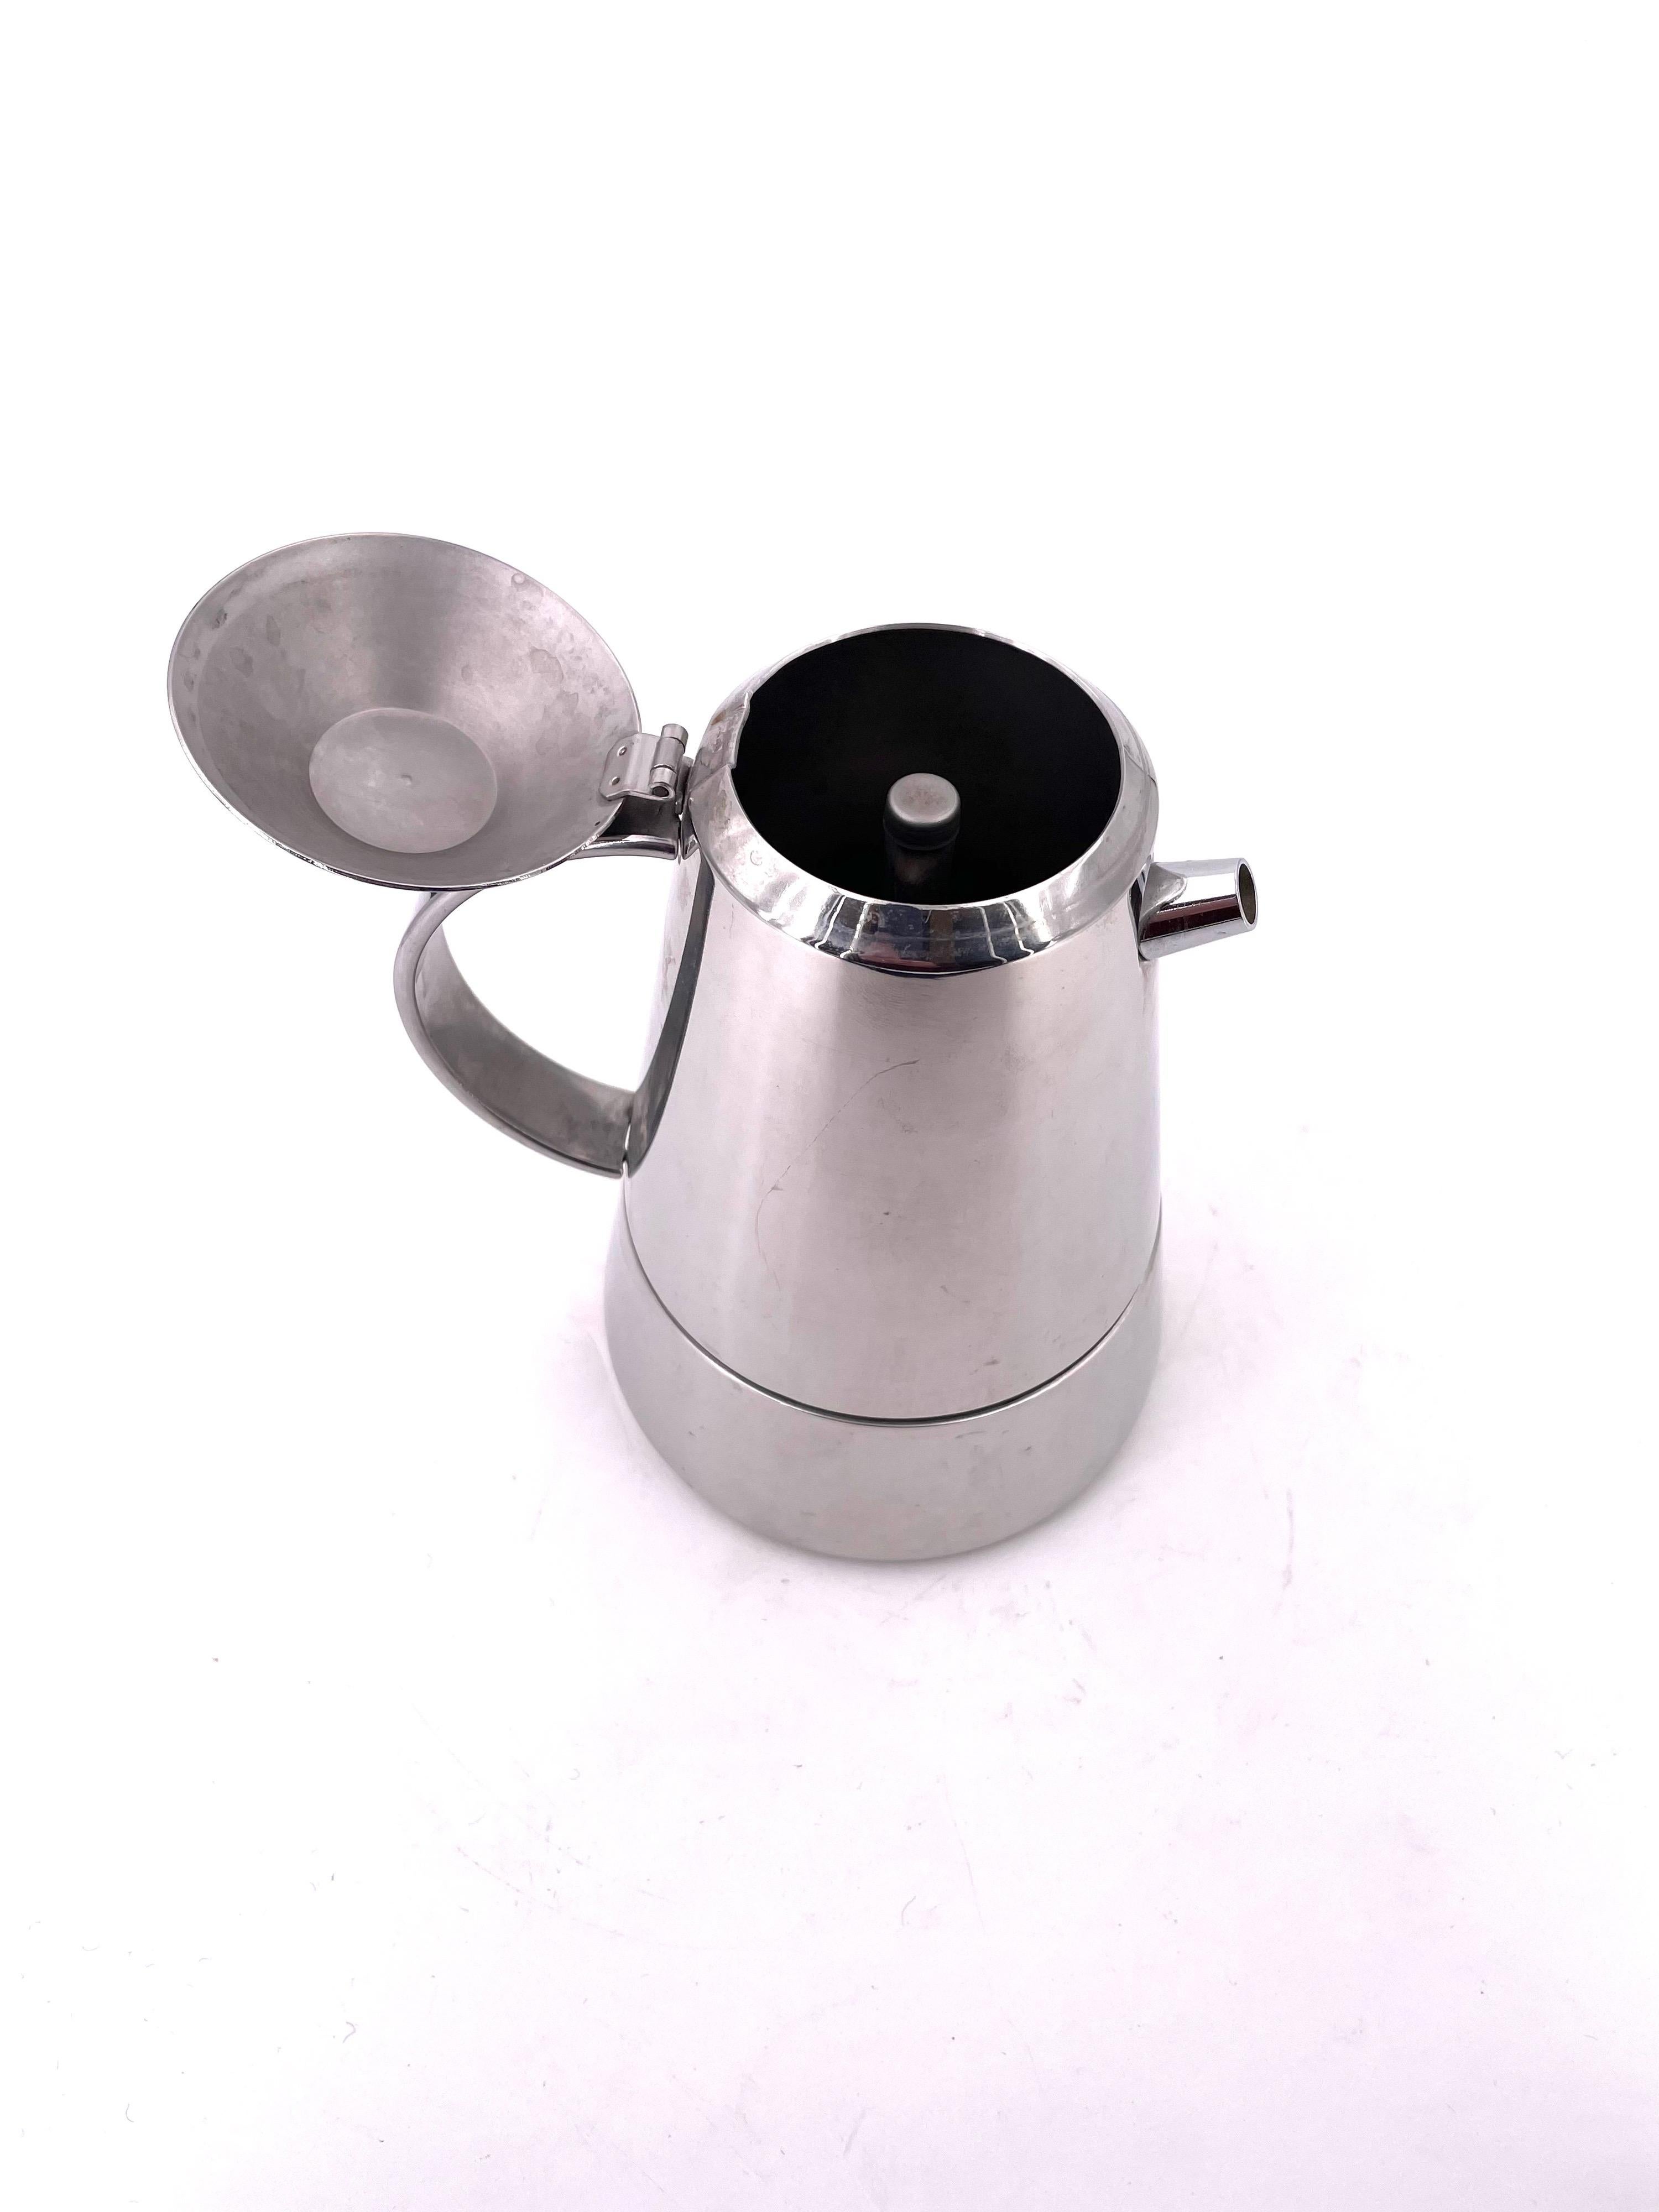 Great design early production 6 cup espresso maker designed by Bialetti, circa 1990s, six cup capacity the design after Italian churches called La cupola. Nice worn condition and working pouring good coffee.